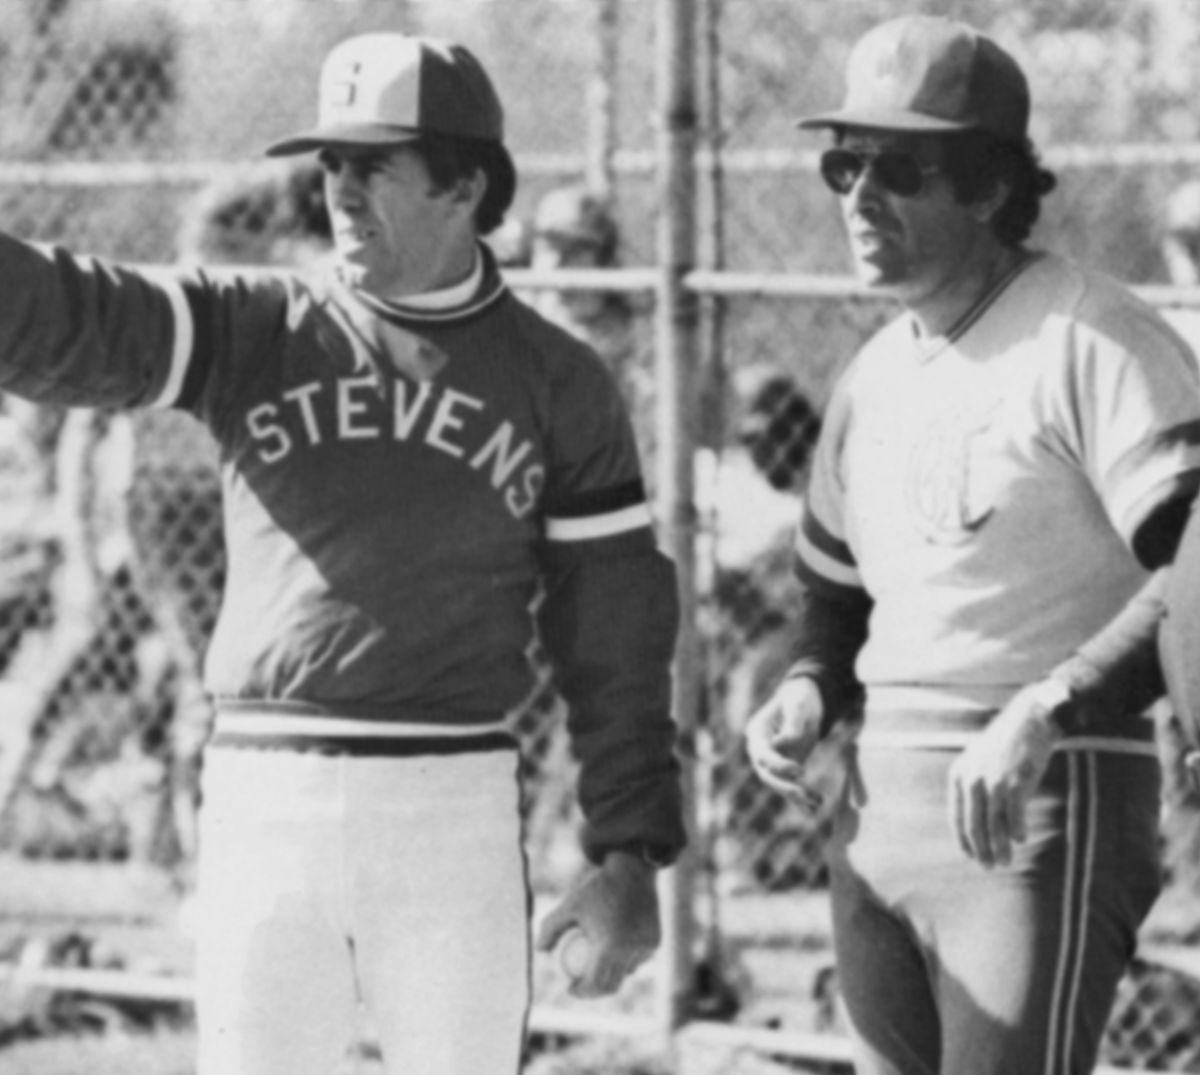 Two baseball coaches on the field in the 1980s.